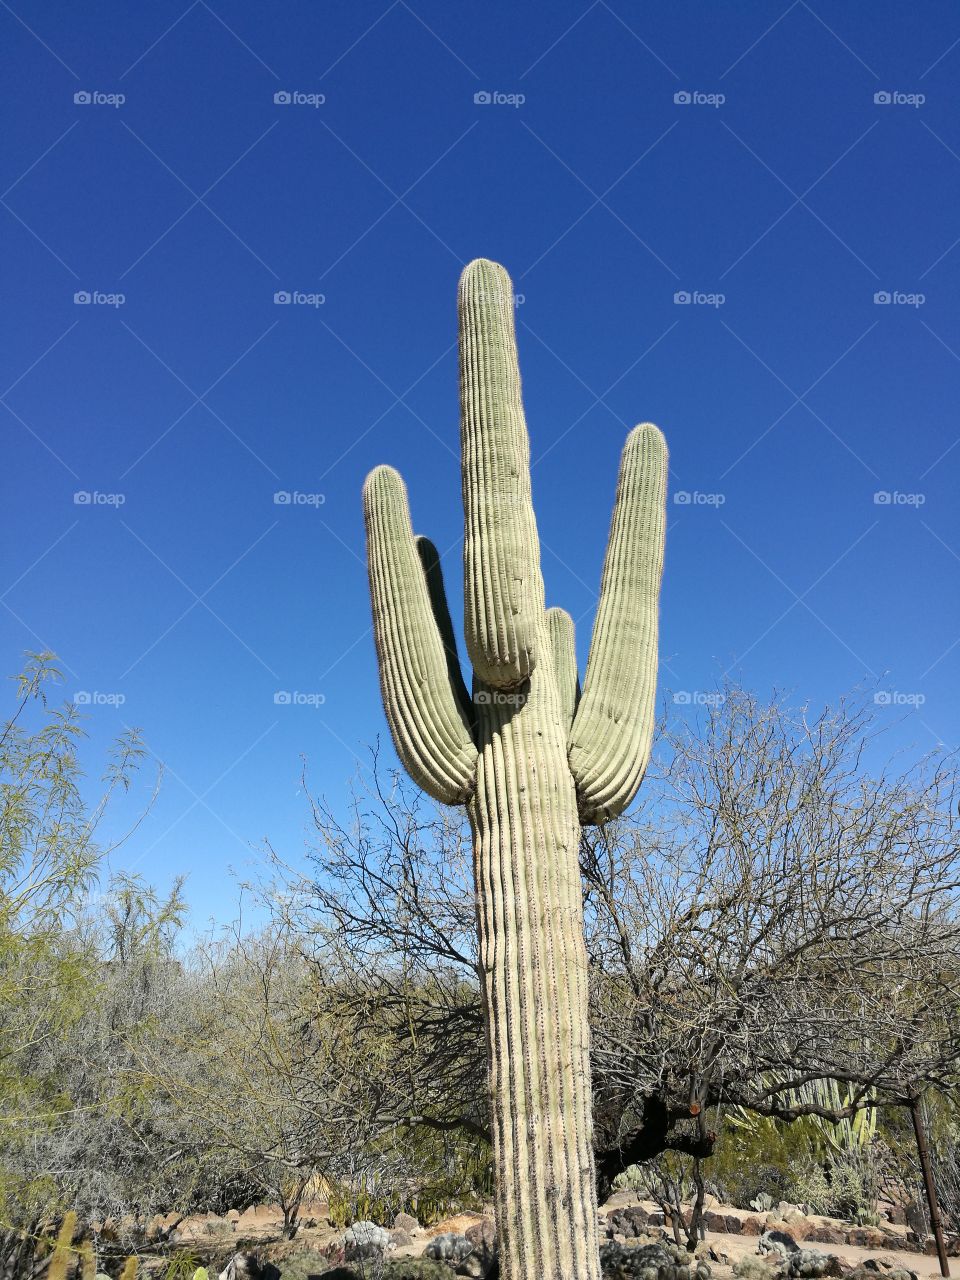 A cactus tree with background of blue sky